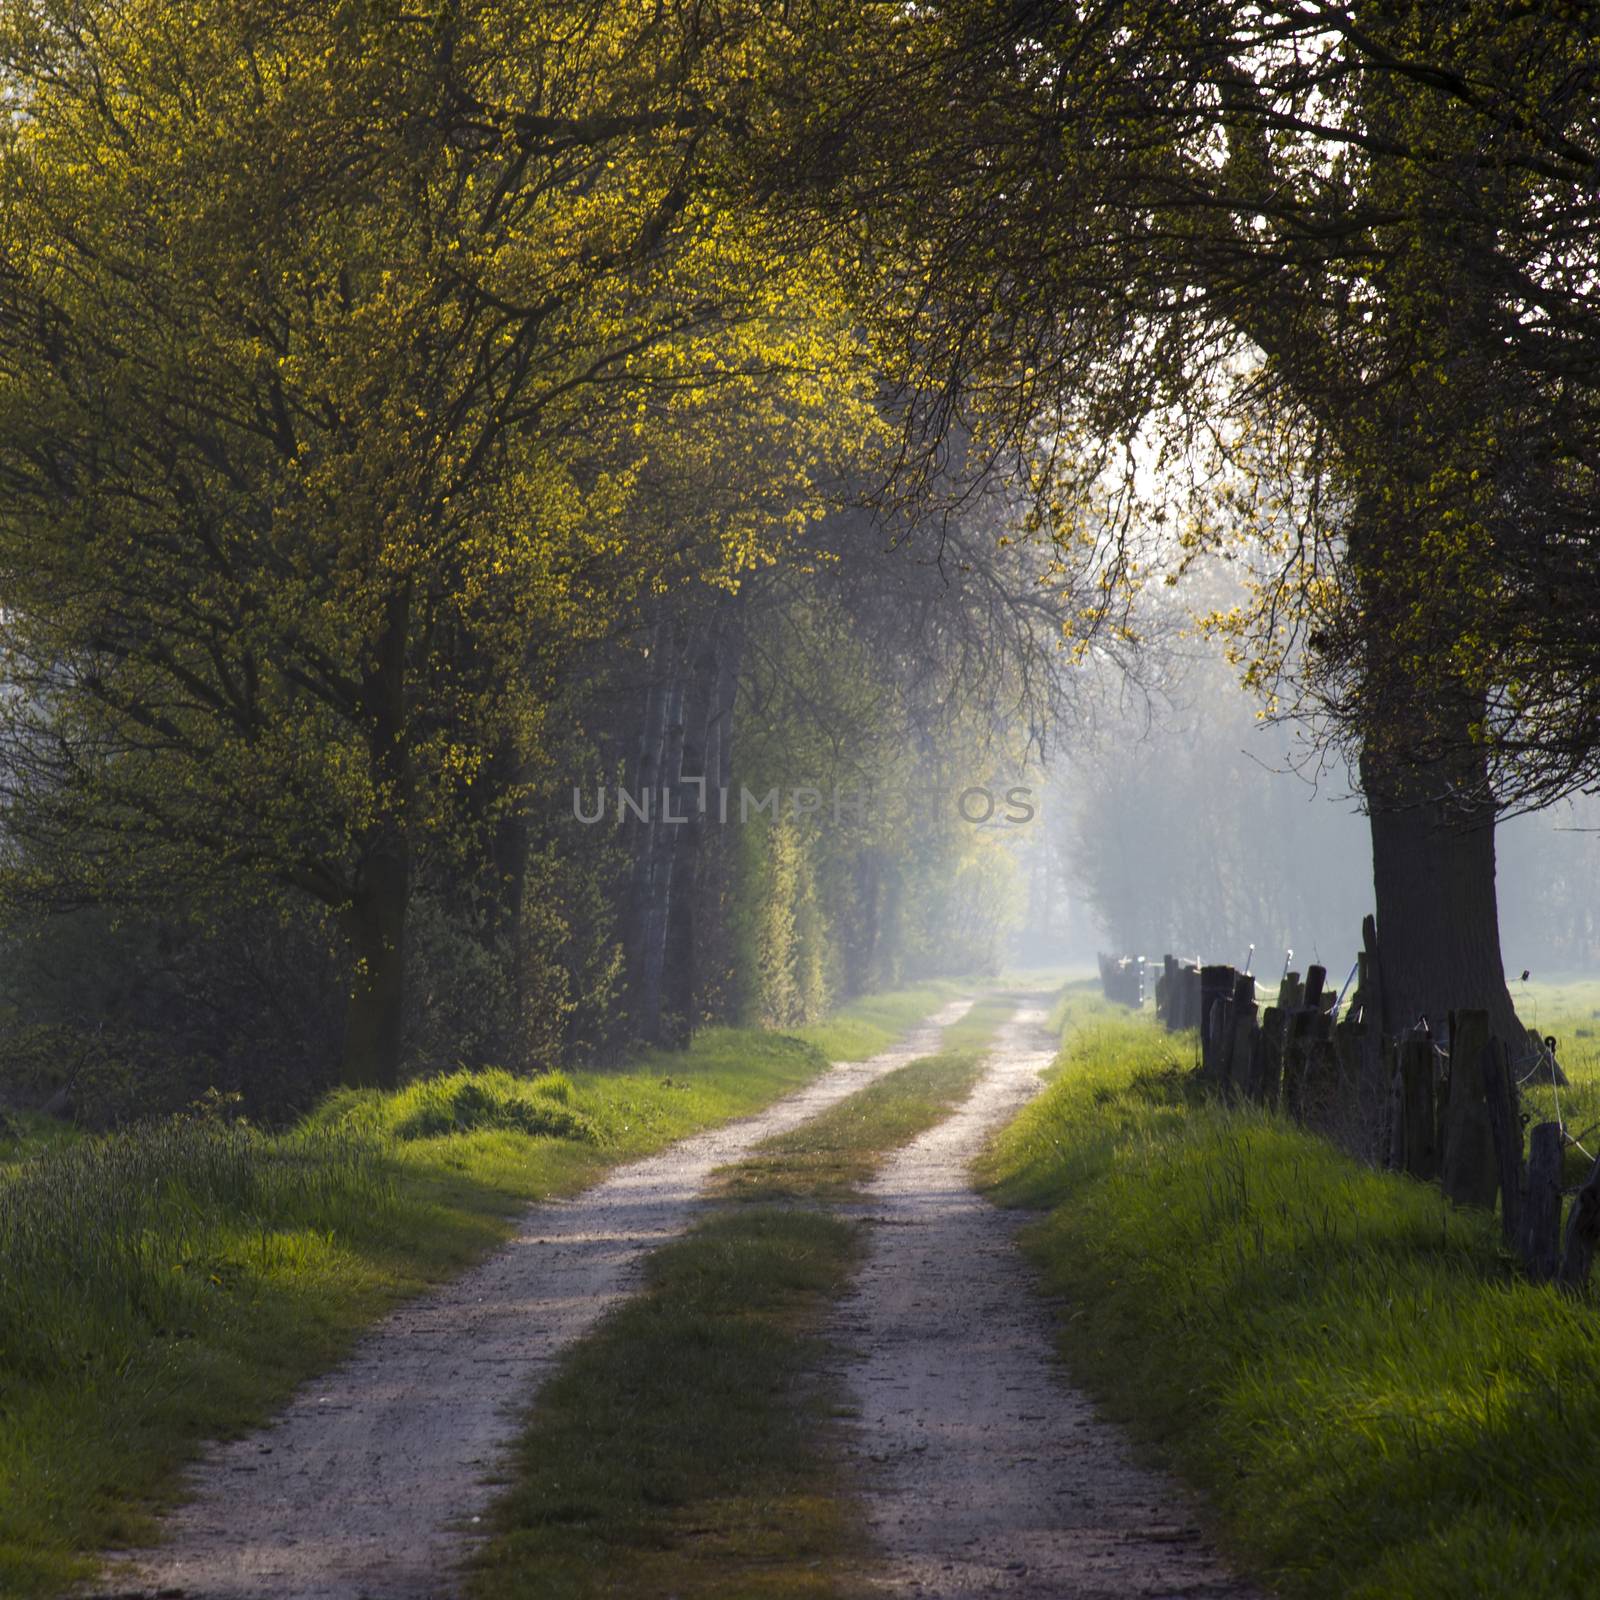 warm light falling on a road in a dark forest  by miradrozdowski